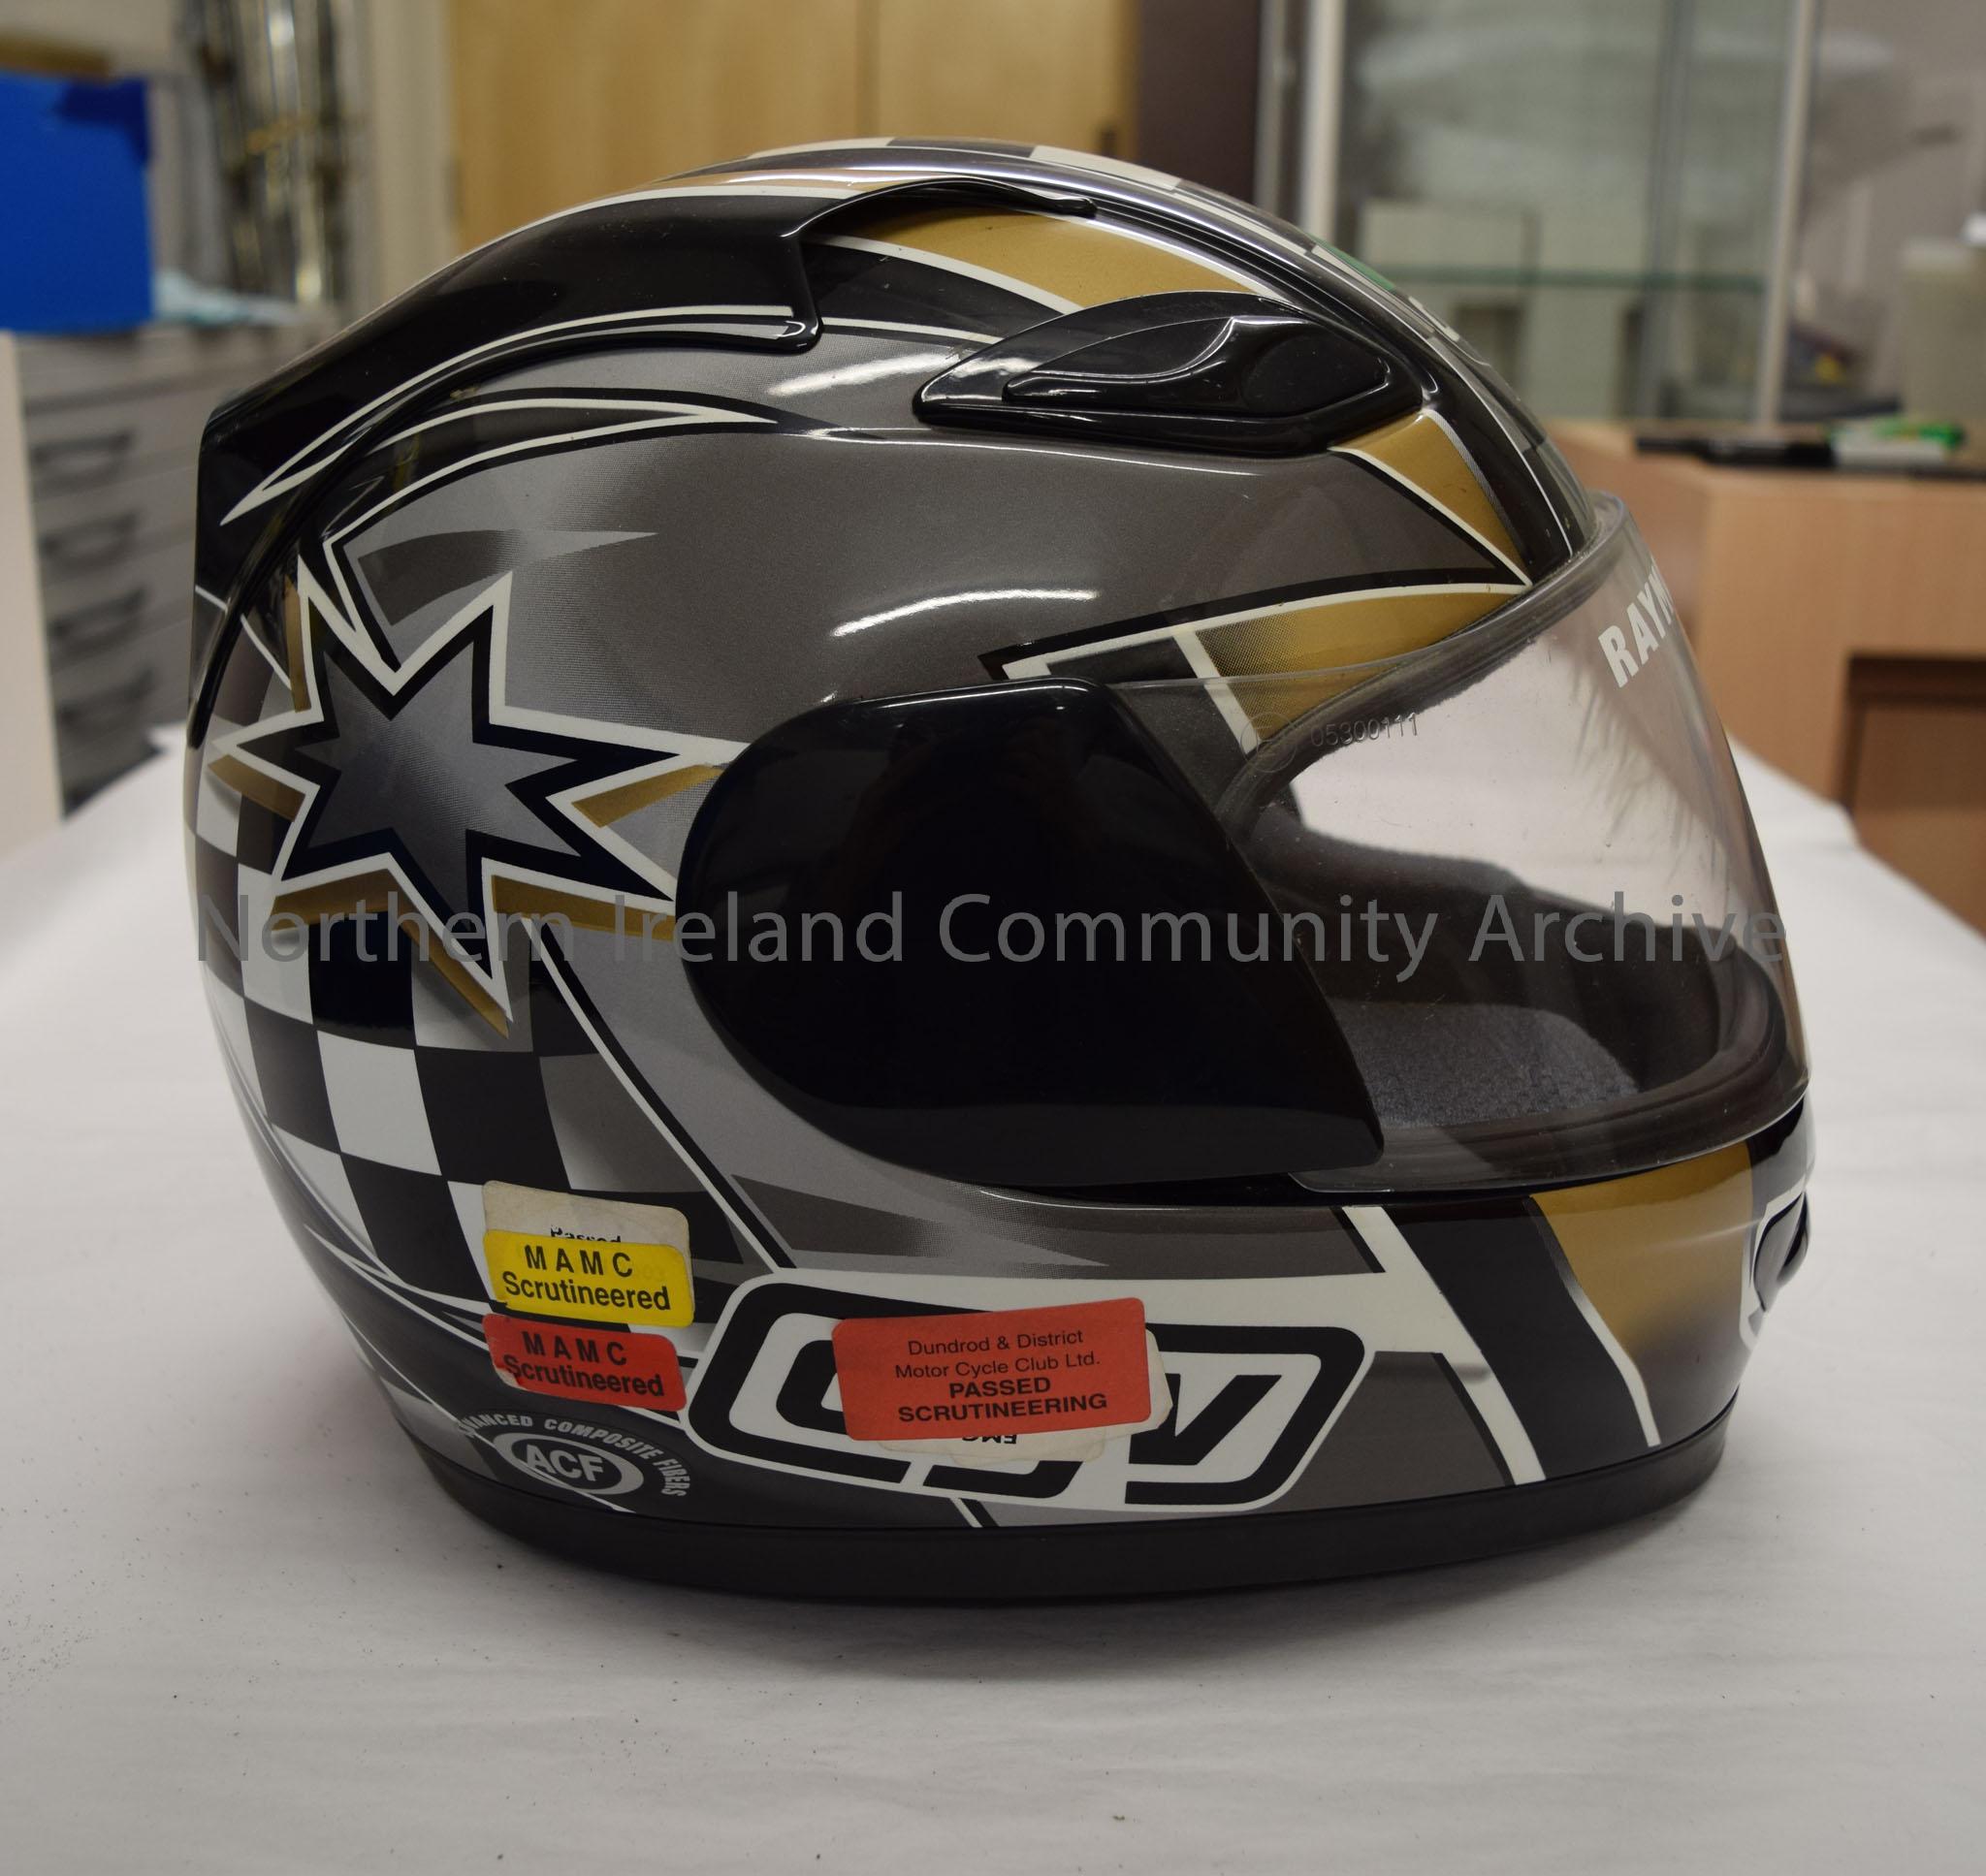 AGV motorcycle helmet belonging to Raymond Hodge. Black helmet with dark grey and gold pattern. Black and white chequered pattern down the middle. – 2016.77 (5)